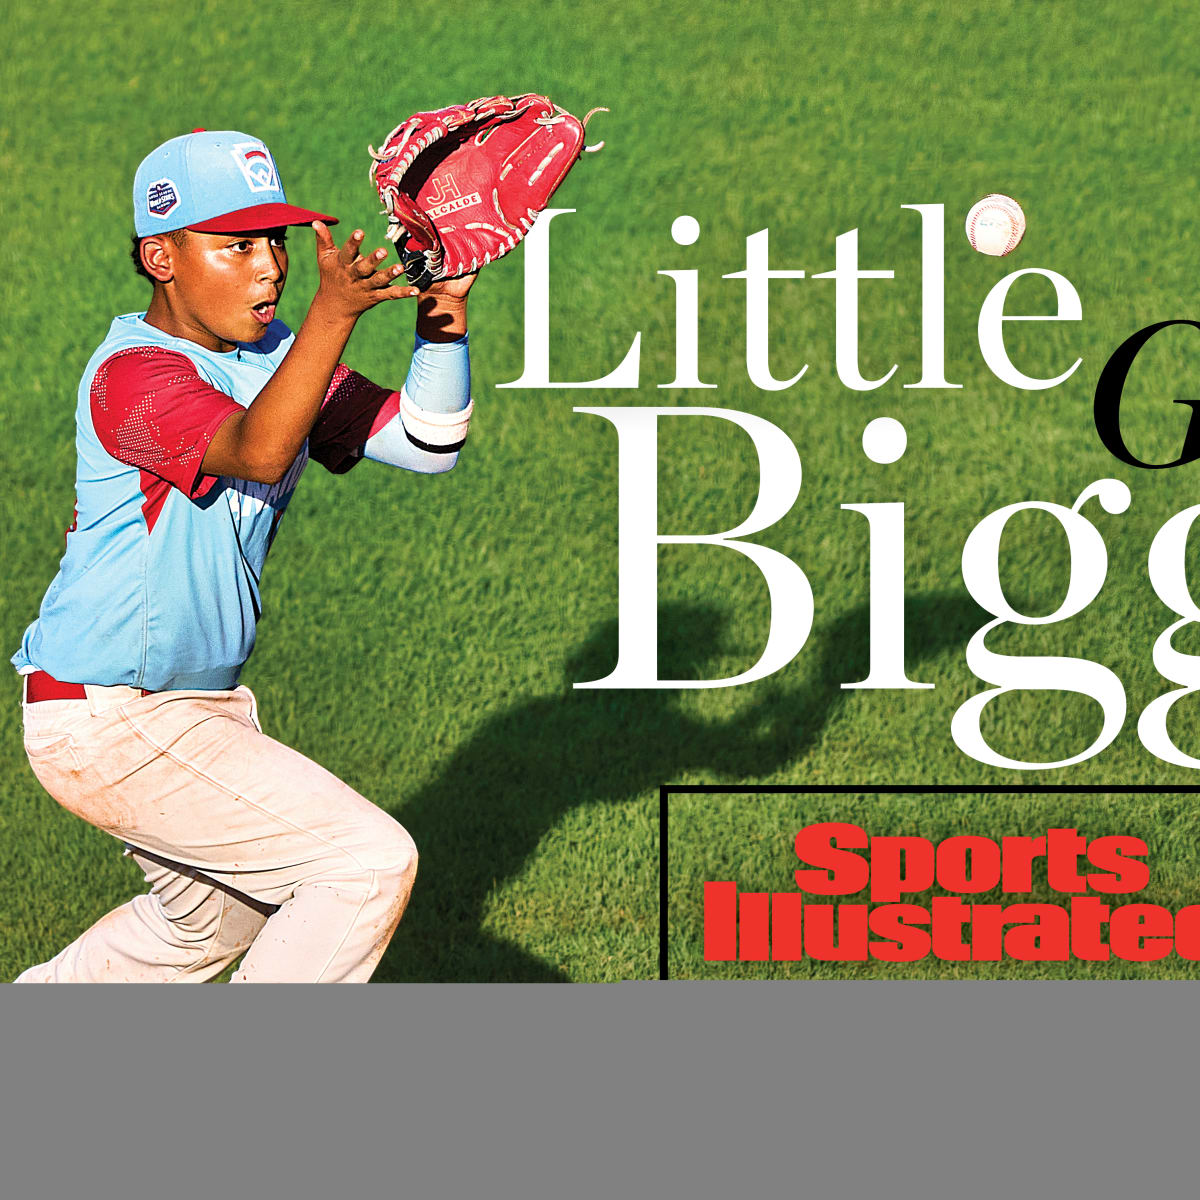 Meet the 20 Teams Competing in the 75th Anniversary of the Little League  Baseball World Series - Little League